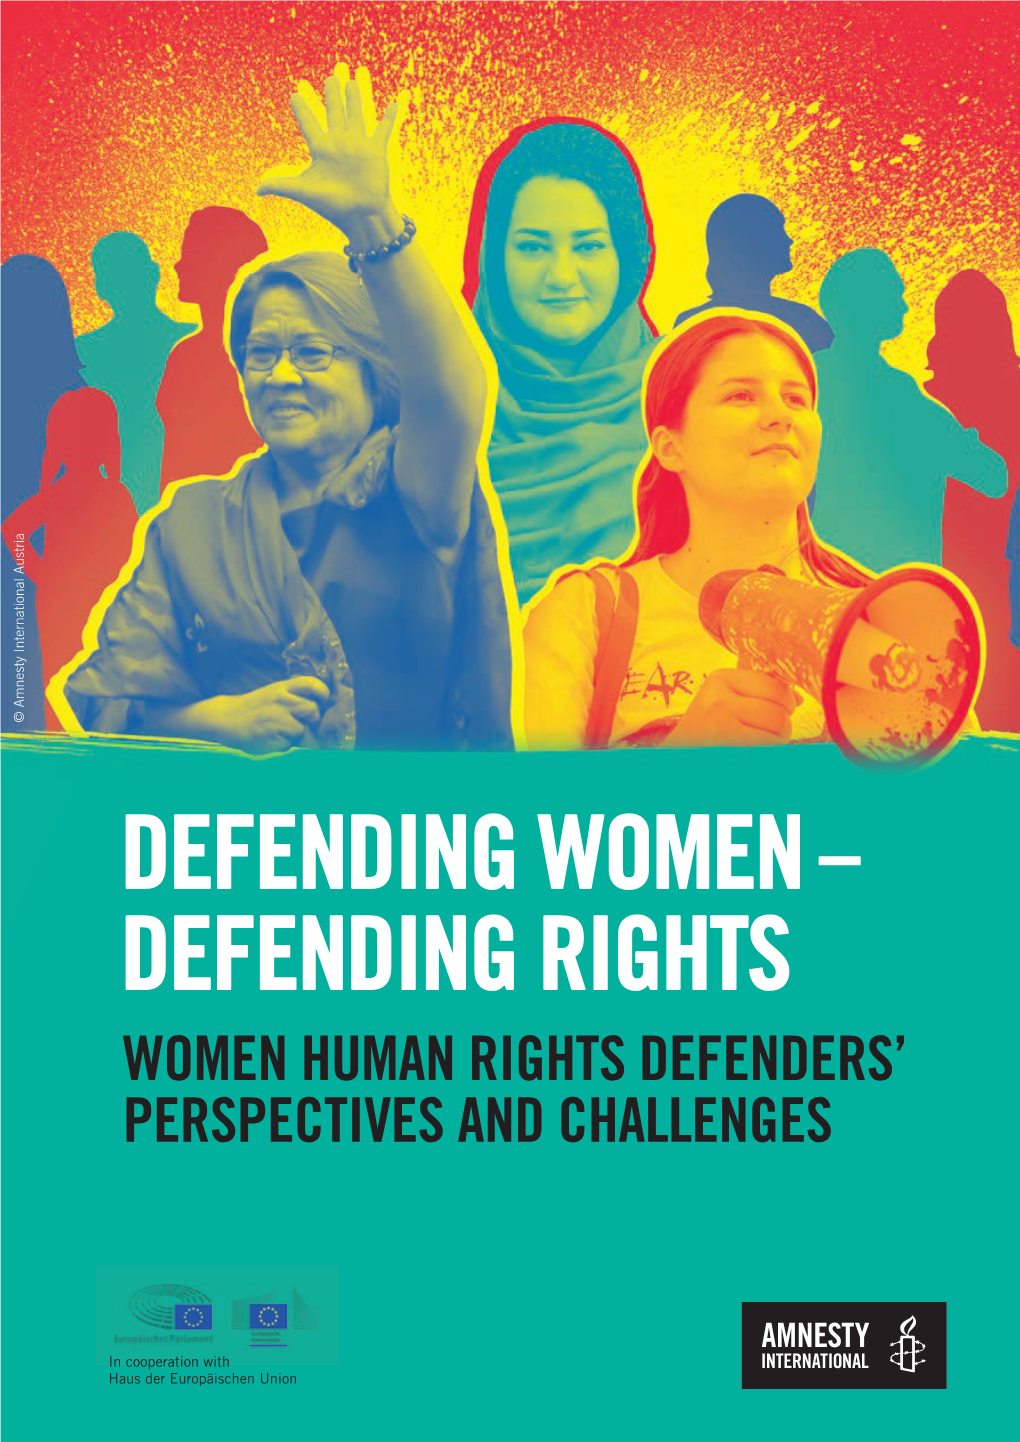 Women Human Rights Defenders' Perspectives and Challenges